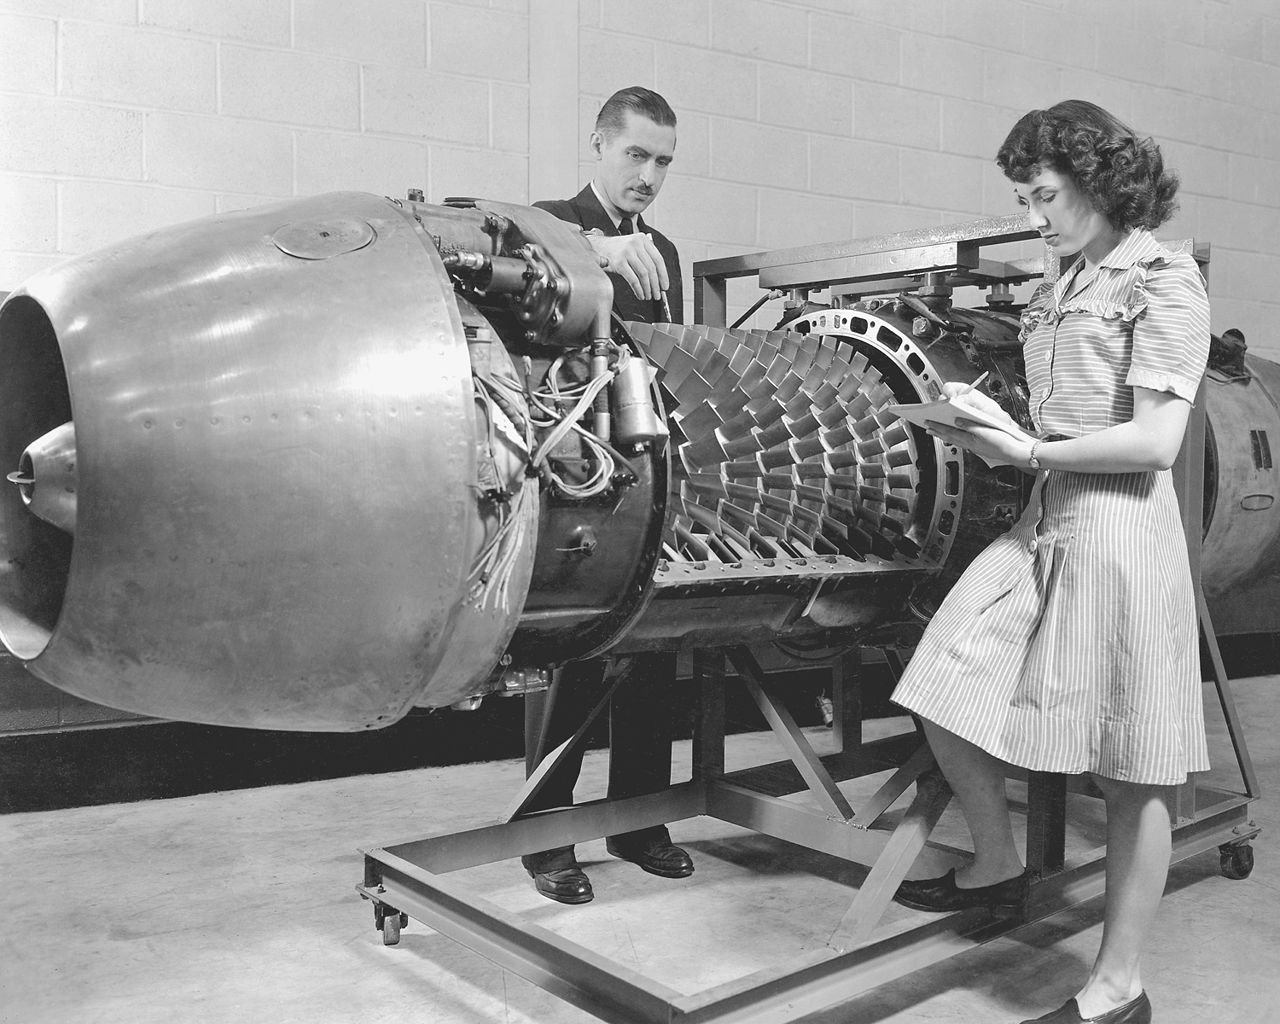 24 March 1946: Jumo 004 was tested at the NACA Aircraft Engine research Laboratory, Cleveland, Ohio. (NASA)